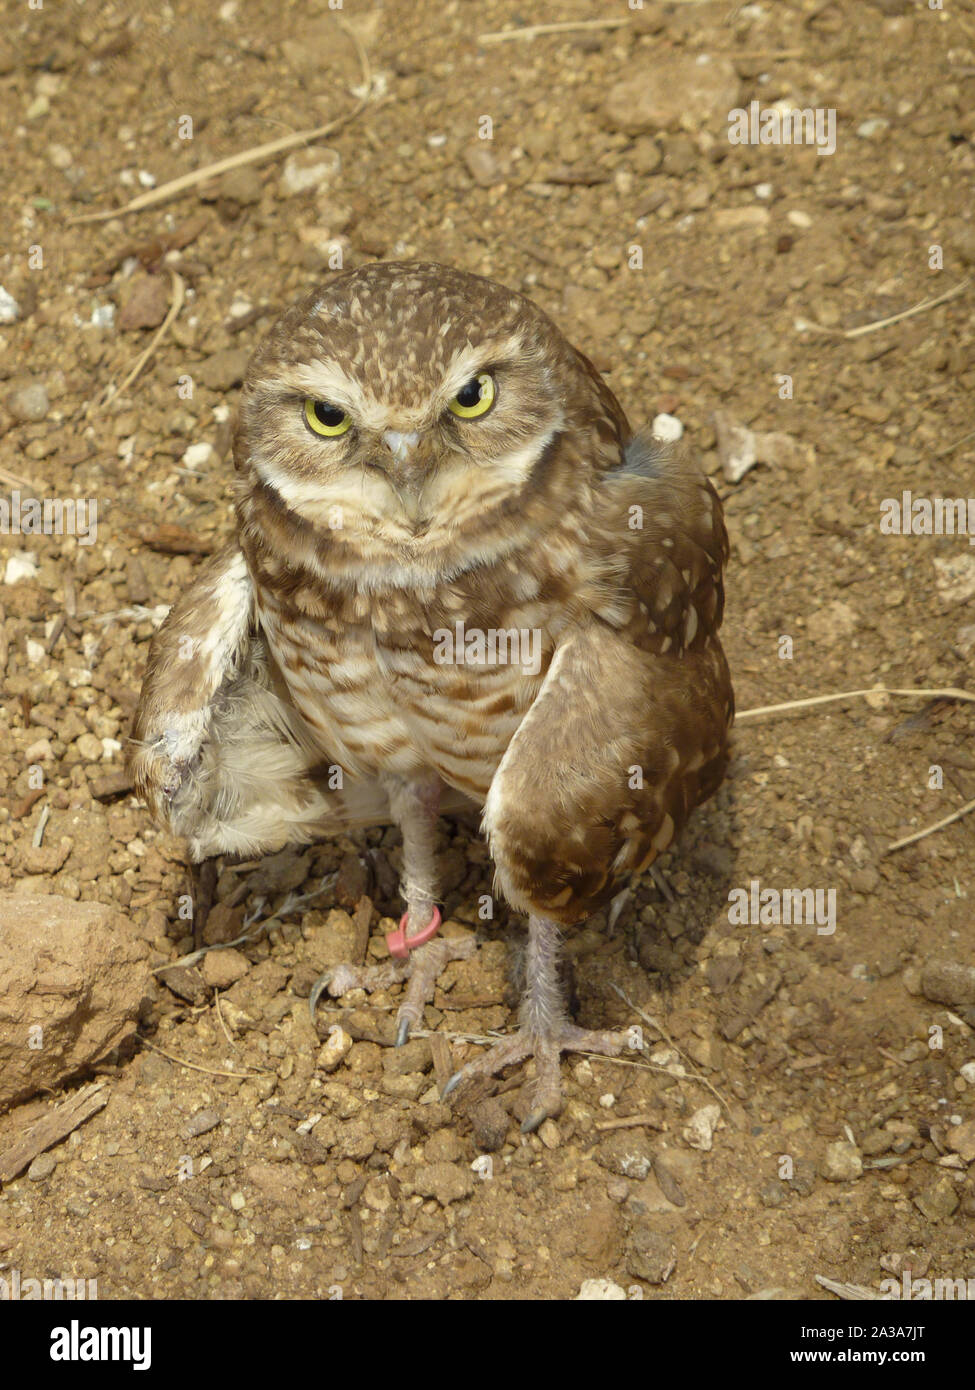 A small desert owl is unamused by the attention it receives from its visitors. Stock Photo